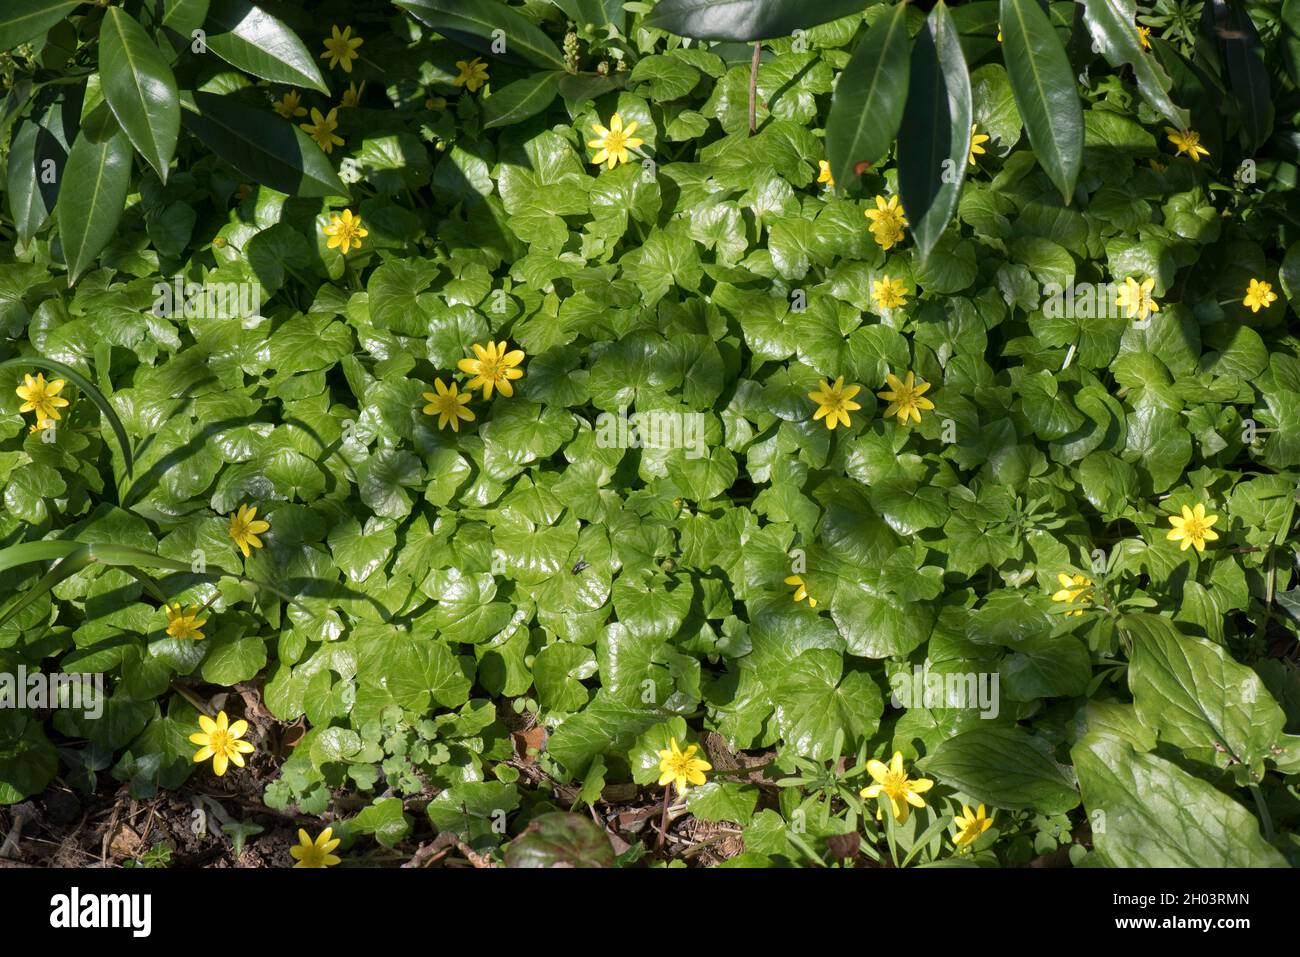 Lesser celandine (Ficaria verna) yellow, buttercup type plants plant flowering in early spring, Berkshire, March Stock Photo